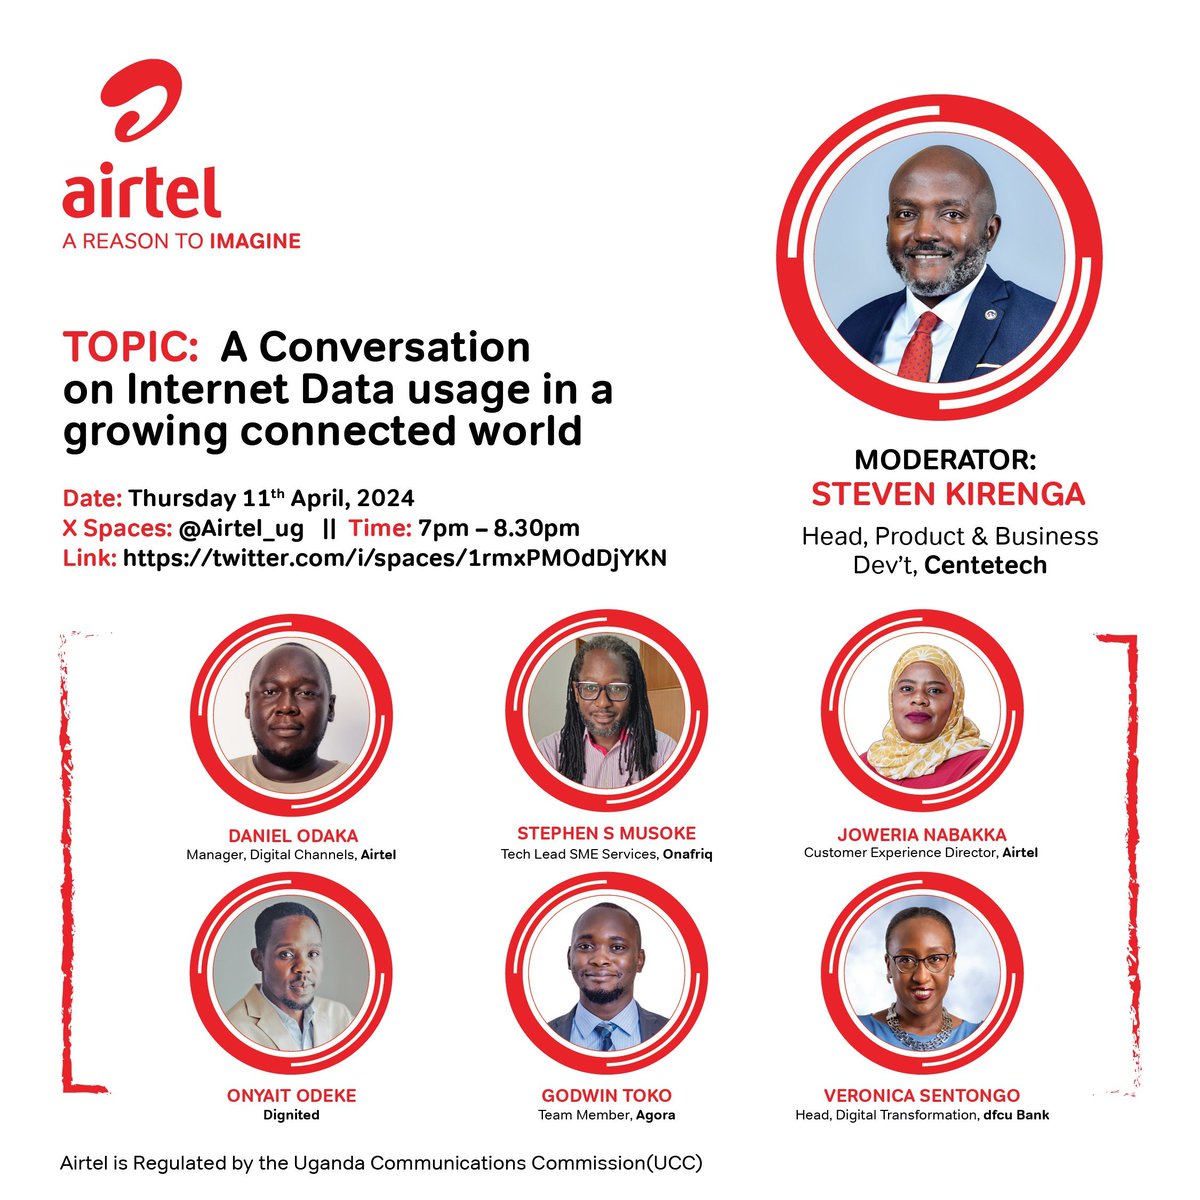 Understanding our data usage becomes crucial as we navigate the digital era. Have questions? We've got answers! Please join this conversation today on 'Internet Data Usage in an Increasingly Connected World' at 7pm! Don't forget to set your reminder.